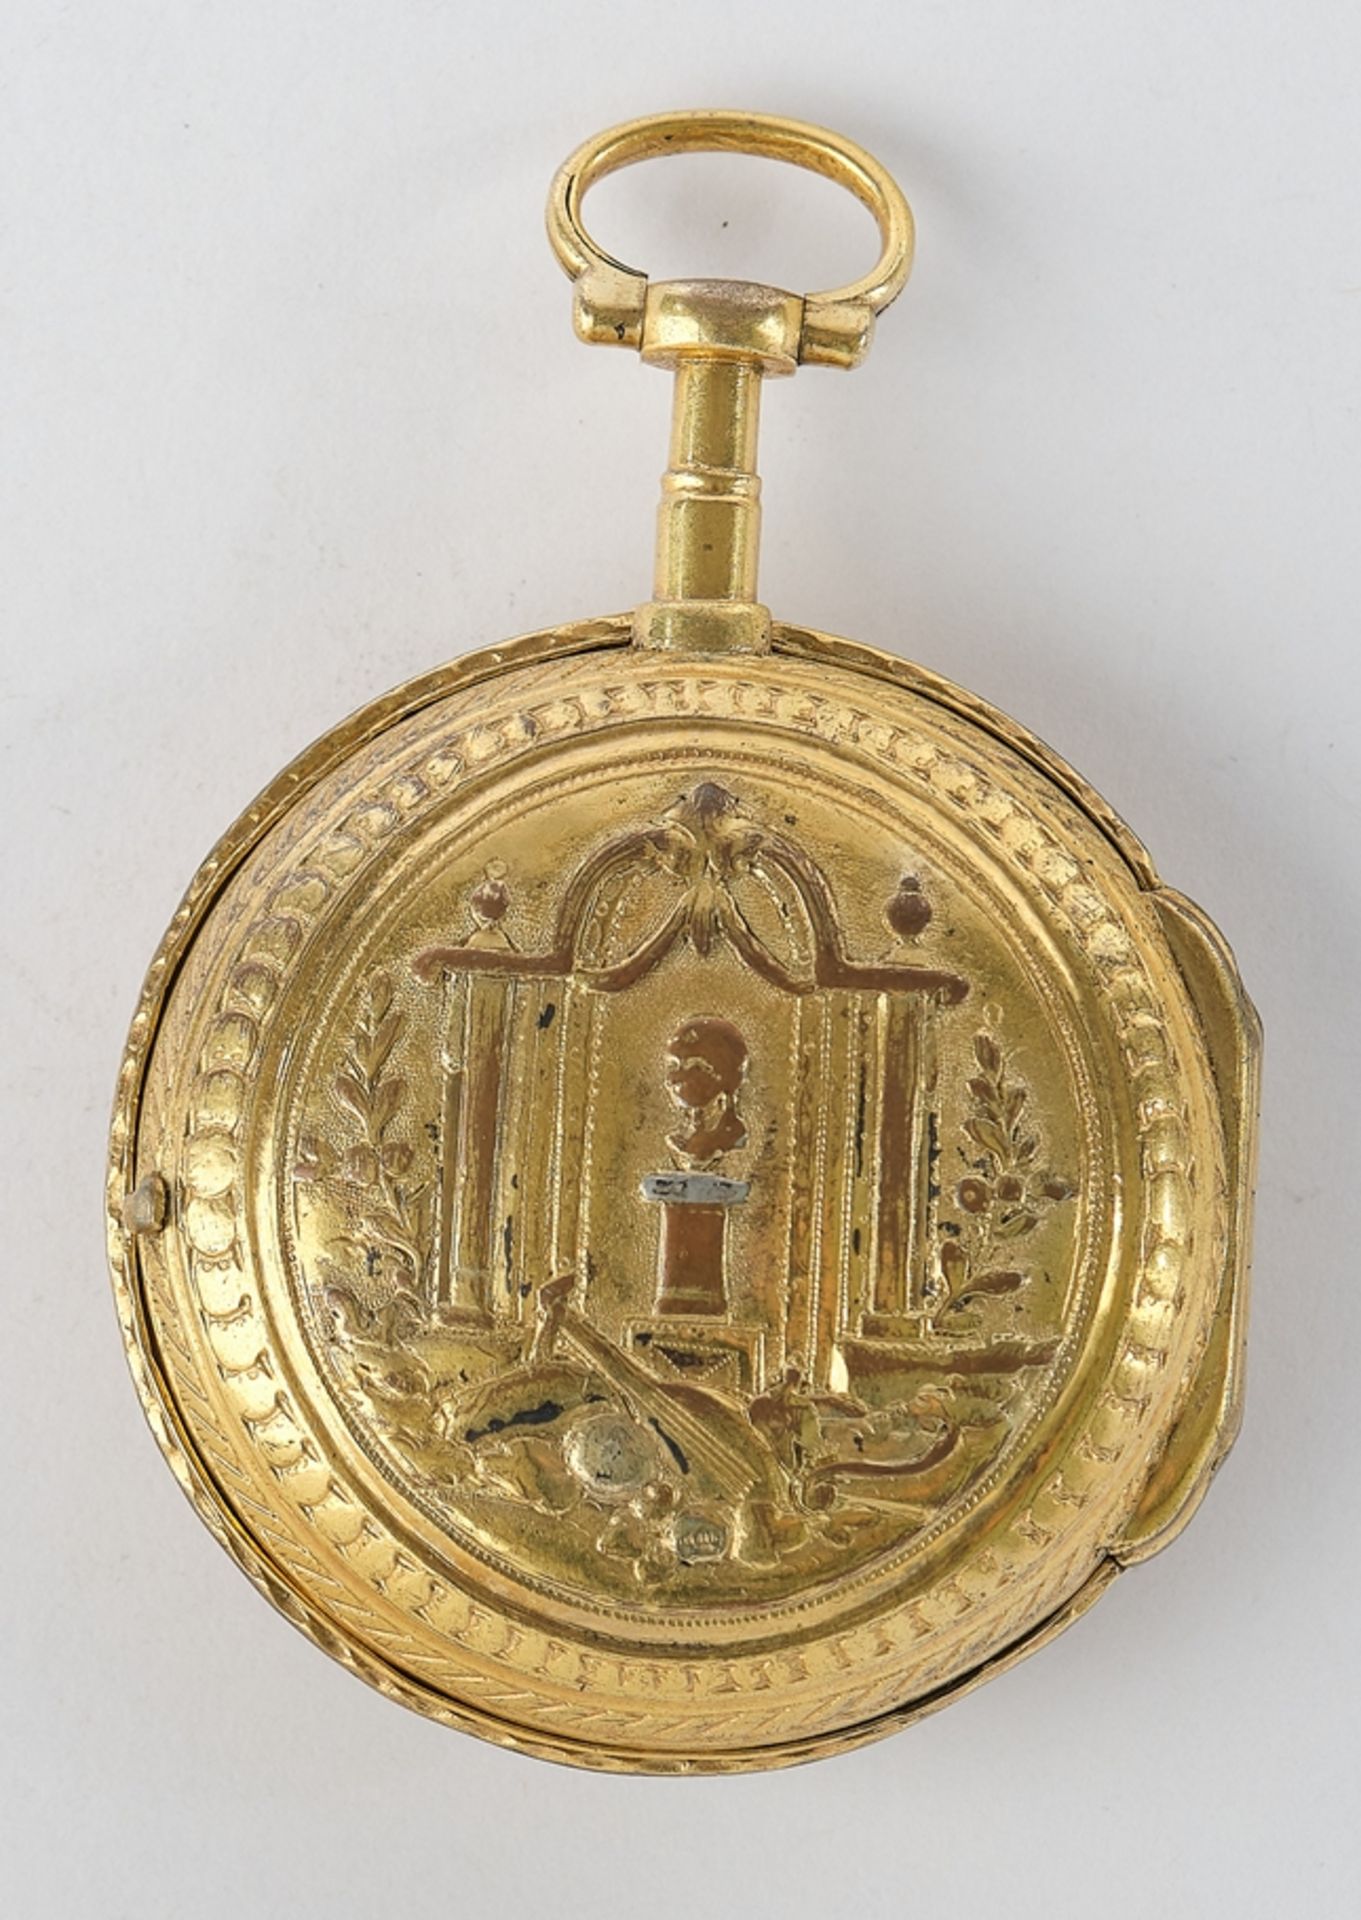 Spindle pocket watch, Lyon / France, circa 1790, signed "Reist / Horloger a Lyon" on the movement,  - Image 5 of 5